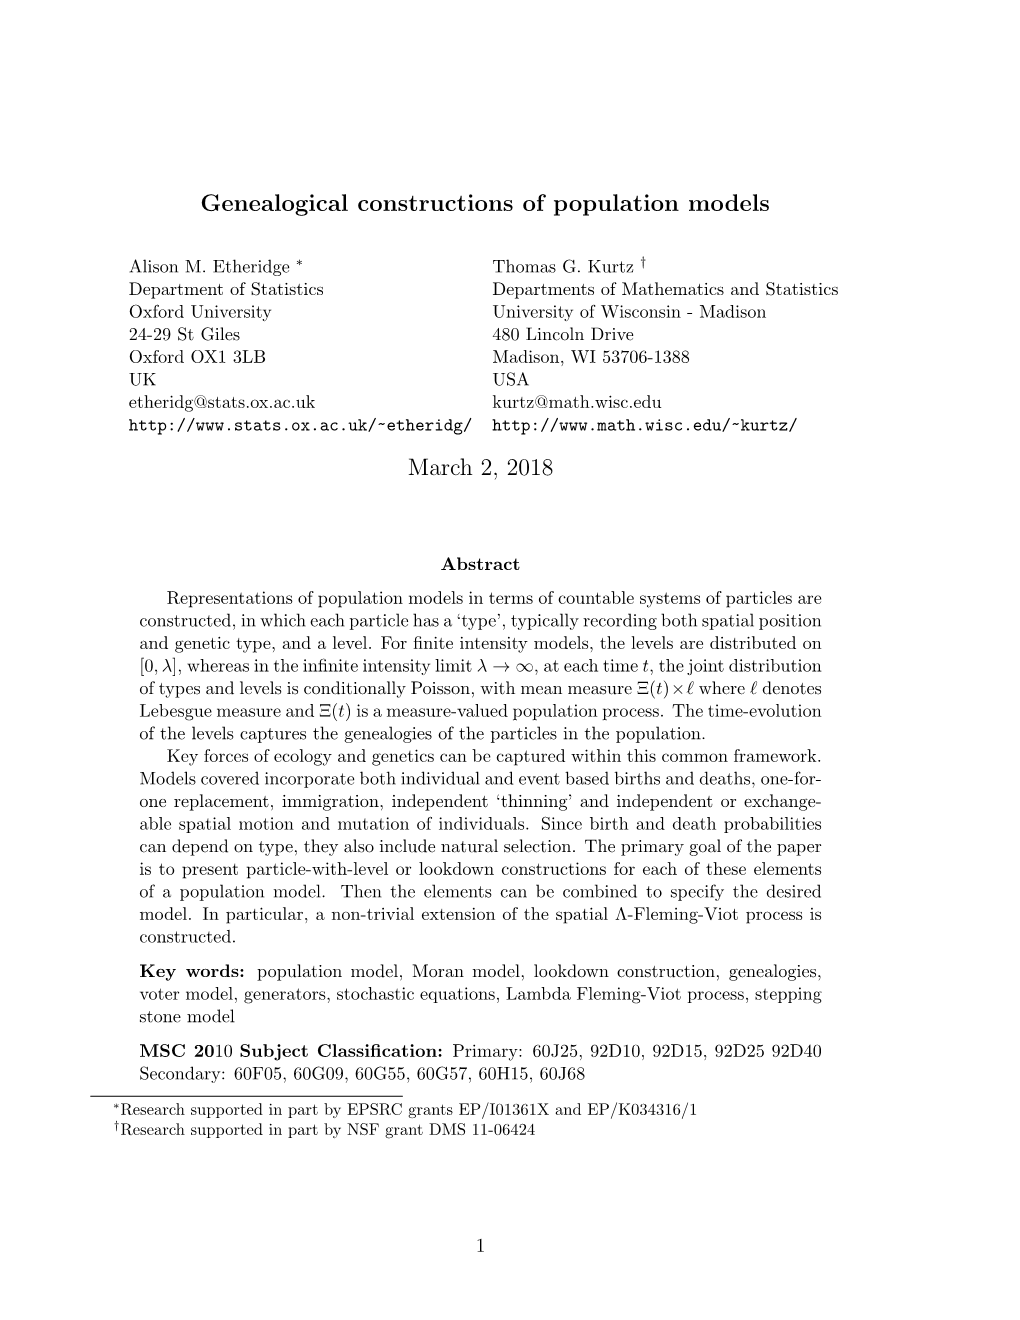 Genealogical Constructions of Population Models March 2, 2018